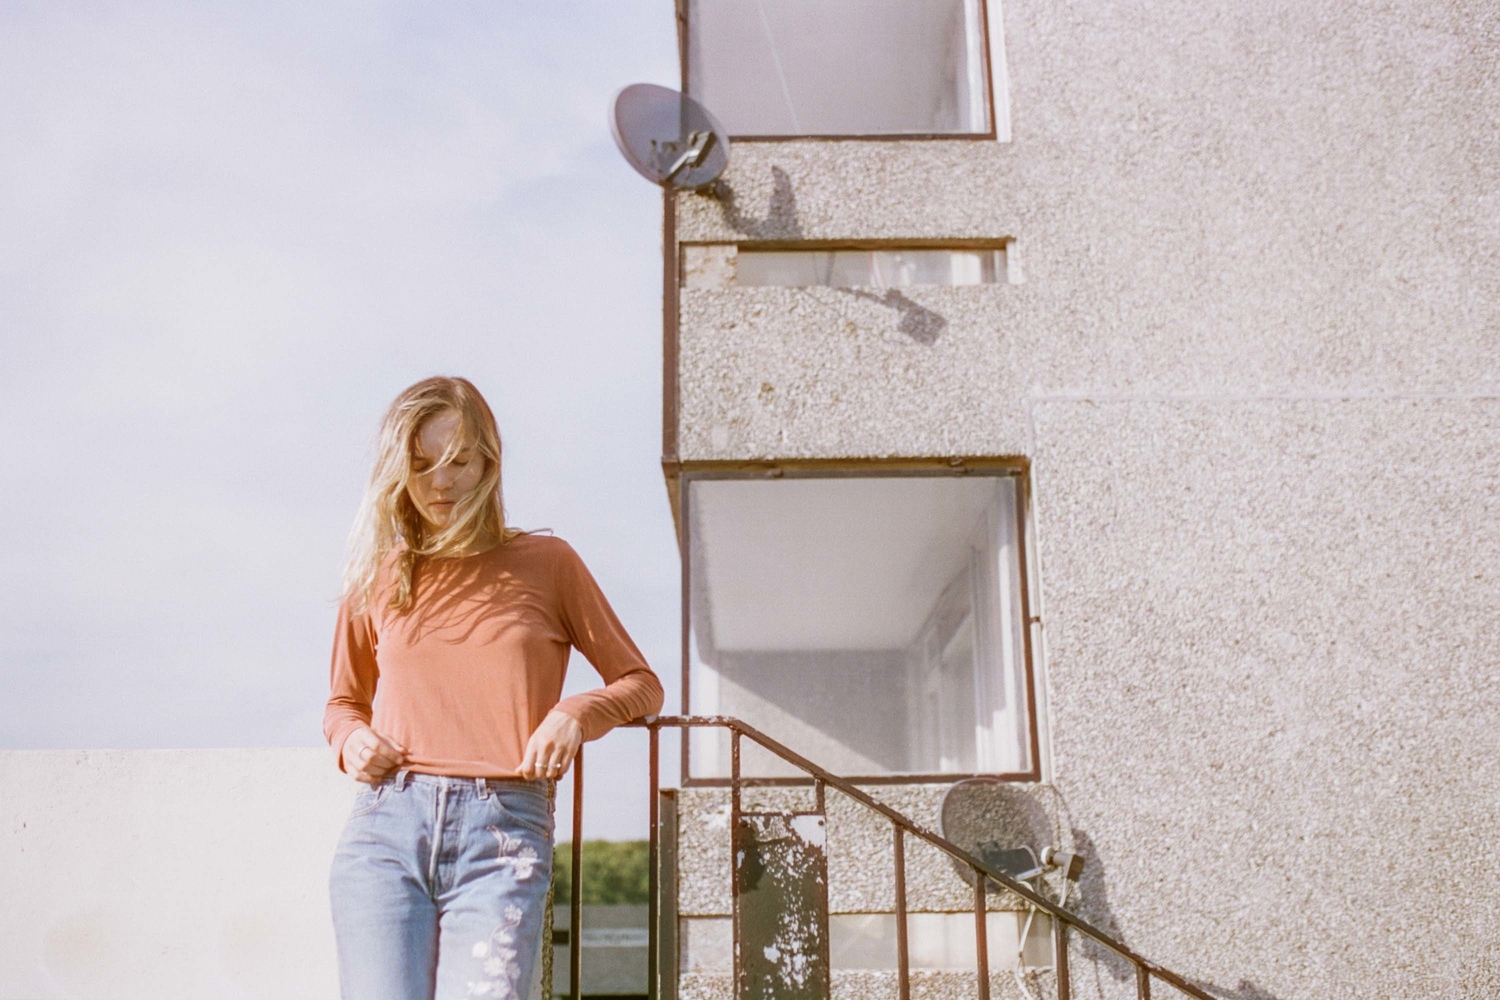 Listen to The Japanese House cover Fleetwood Mac